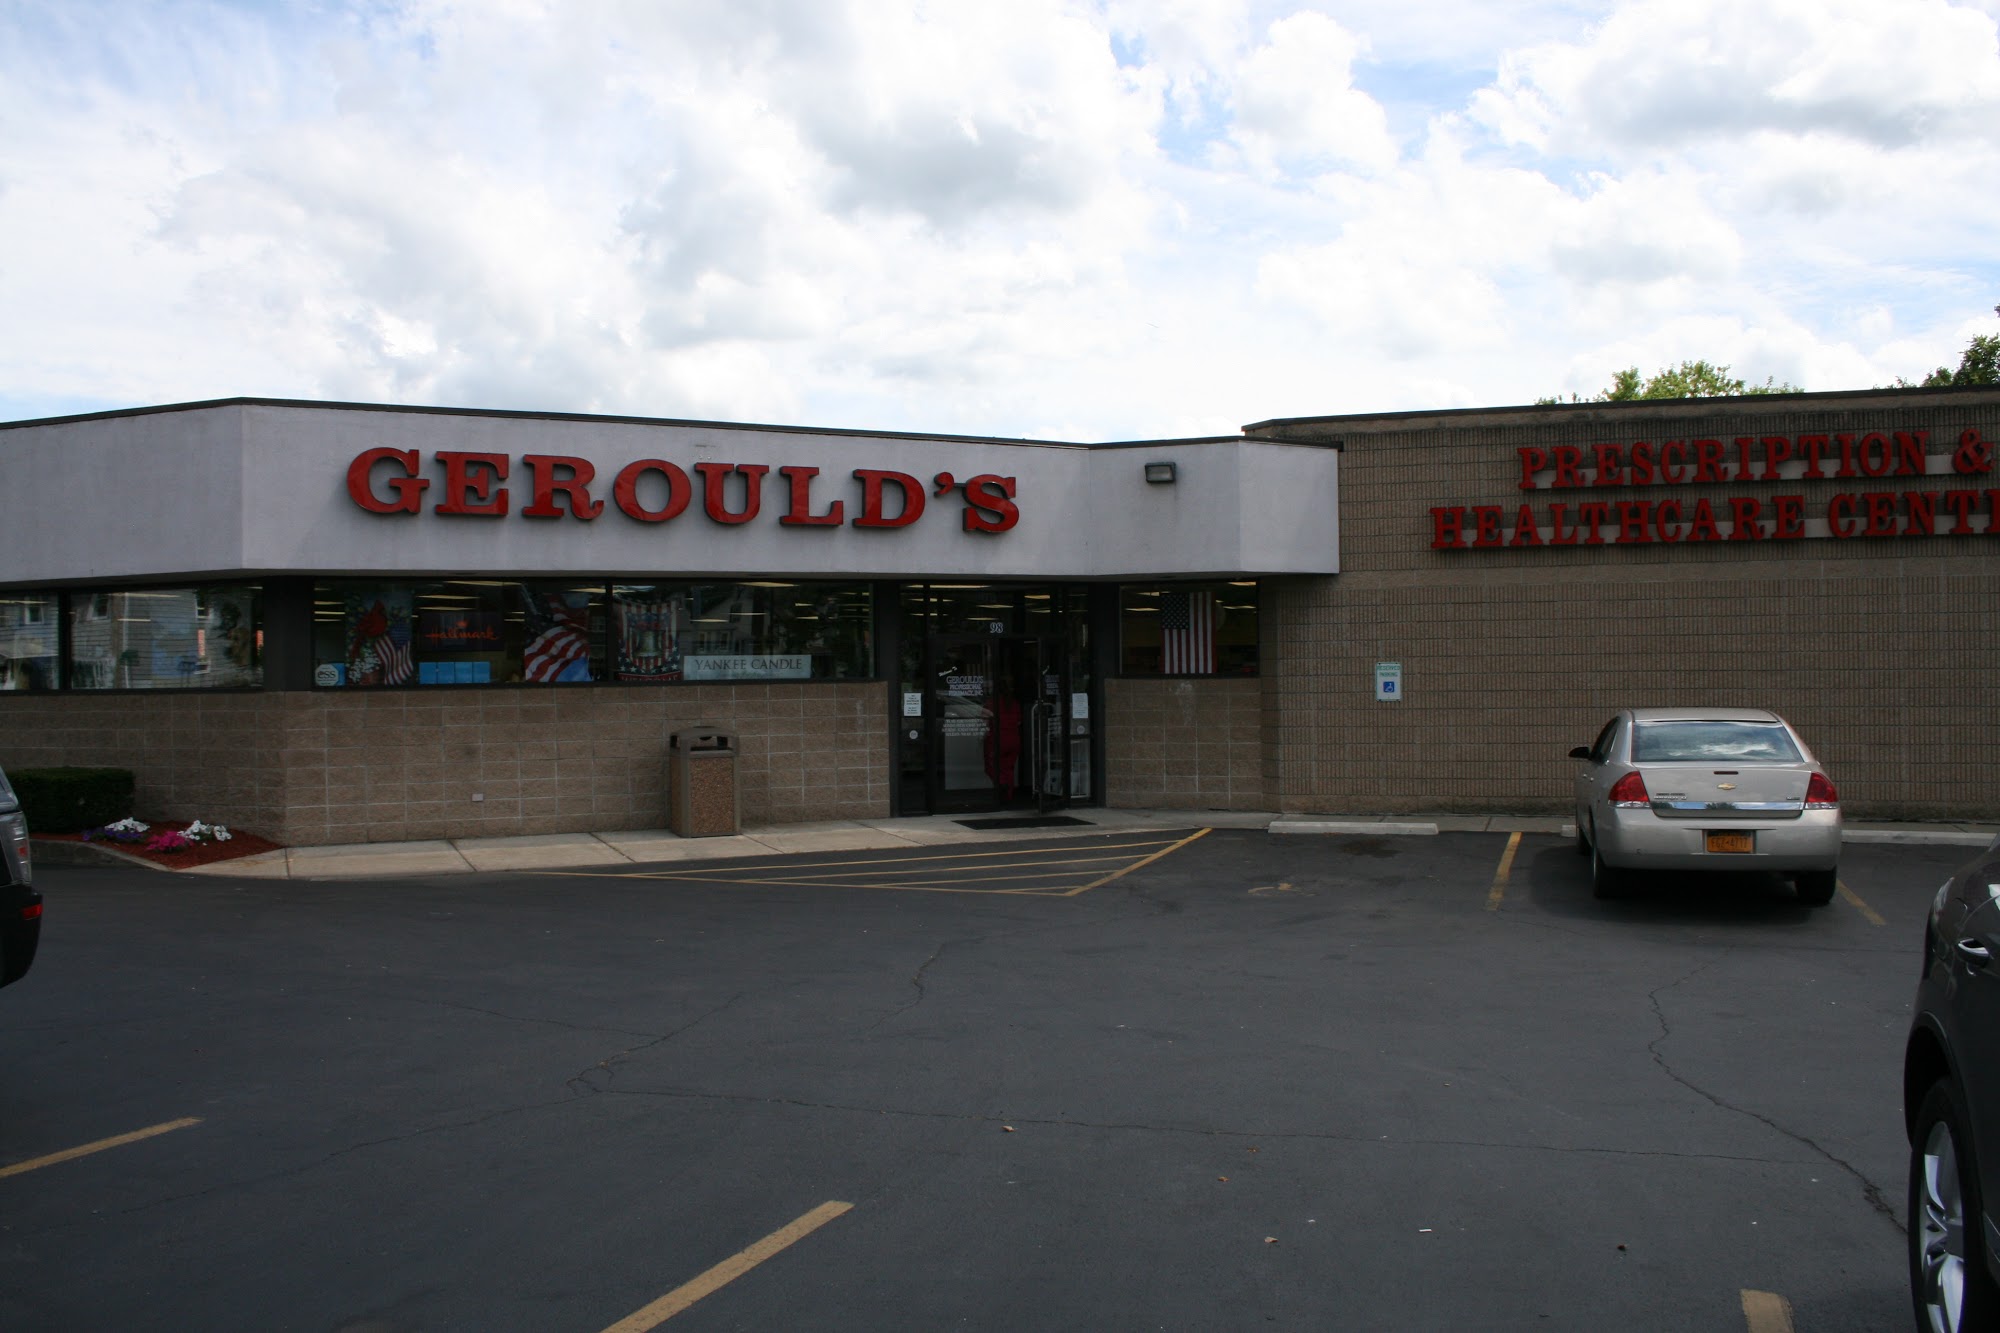 Gerould's Professional Pharmacy